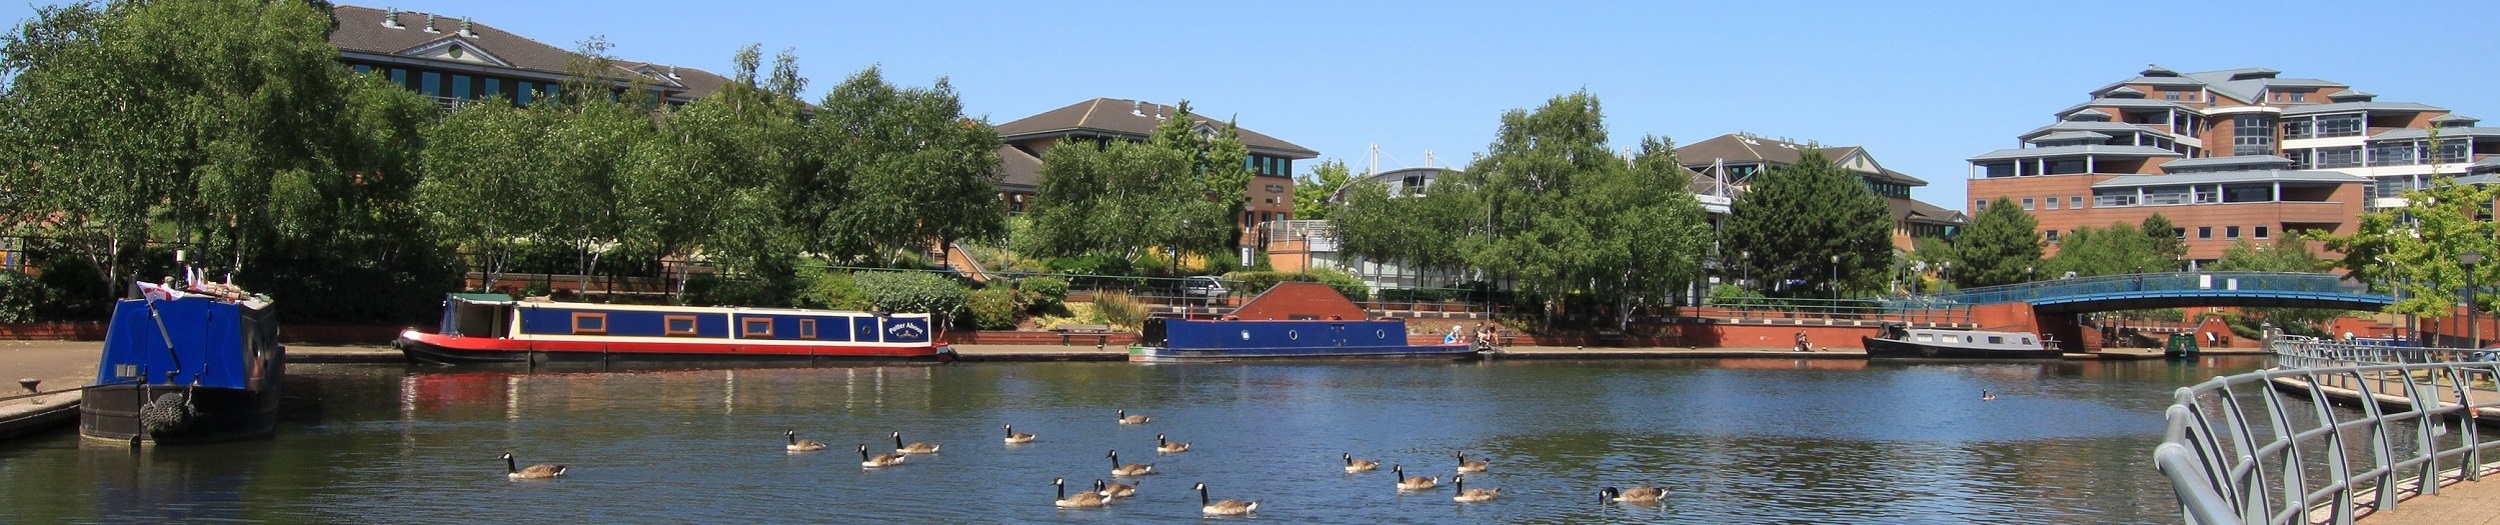 The Waterfront, Brierley Hill